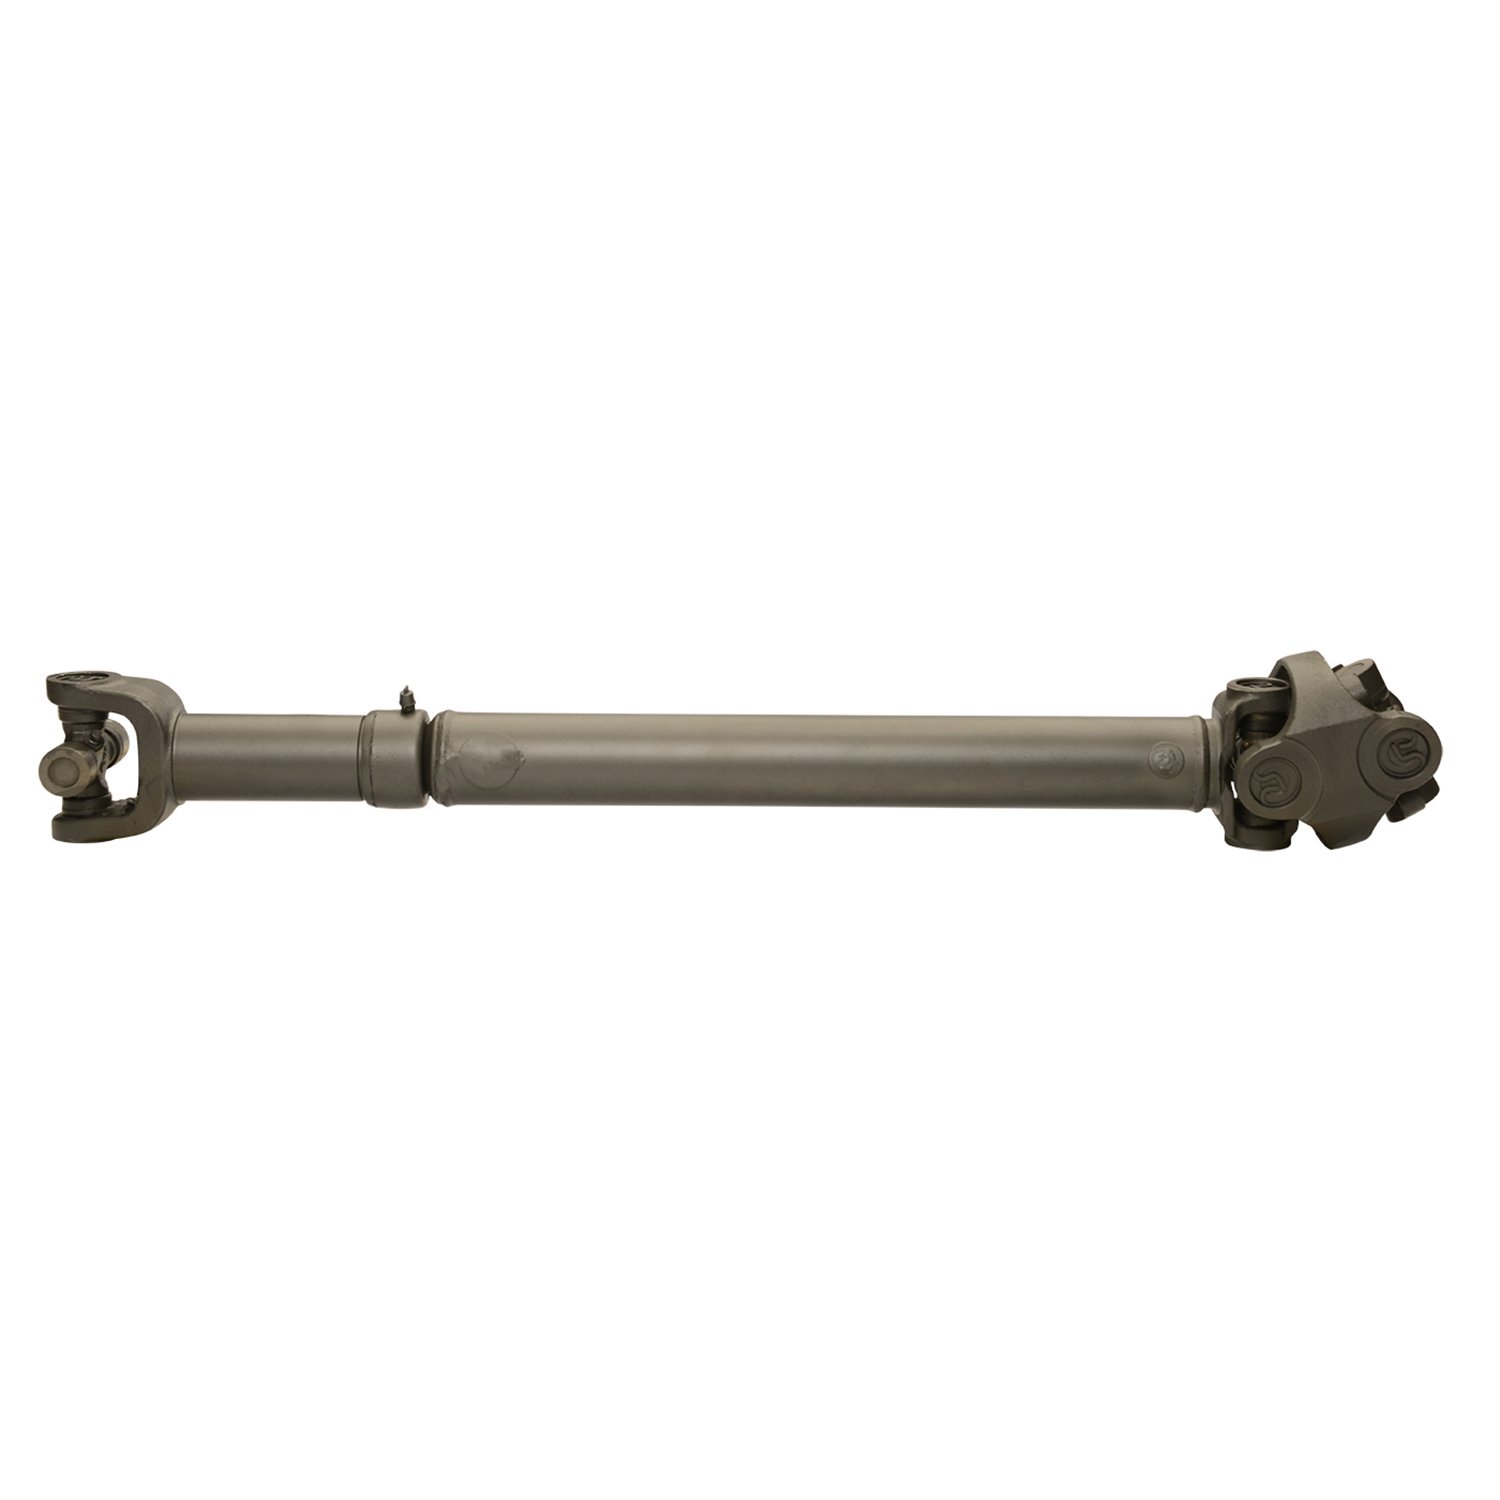 USA Standard ZDS9331 Front Driveshaft, For GM K30/K35 Pickup, 23.15625 in. Center-To-Center